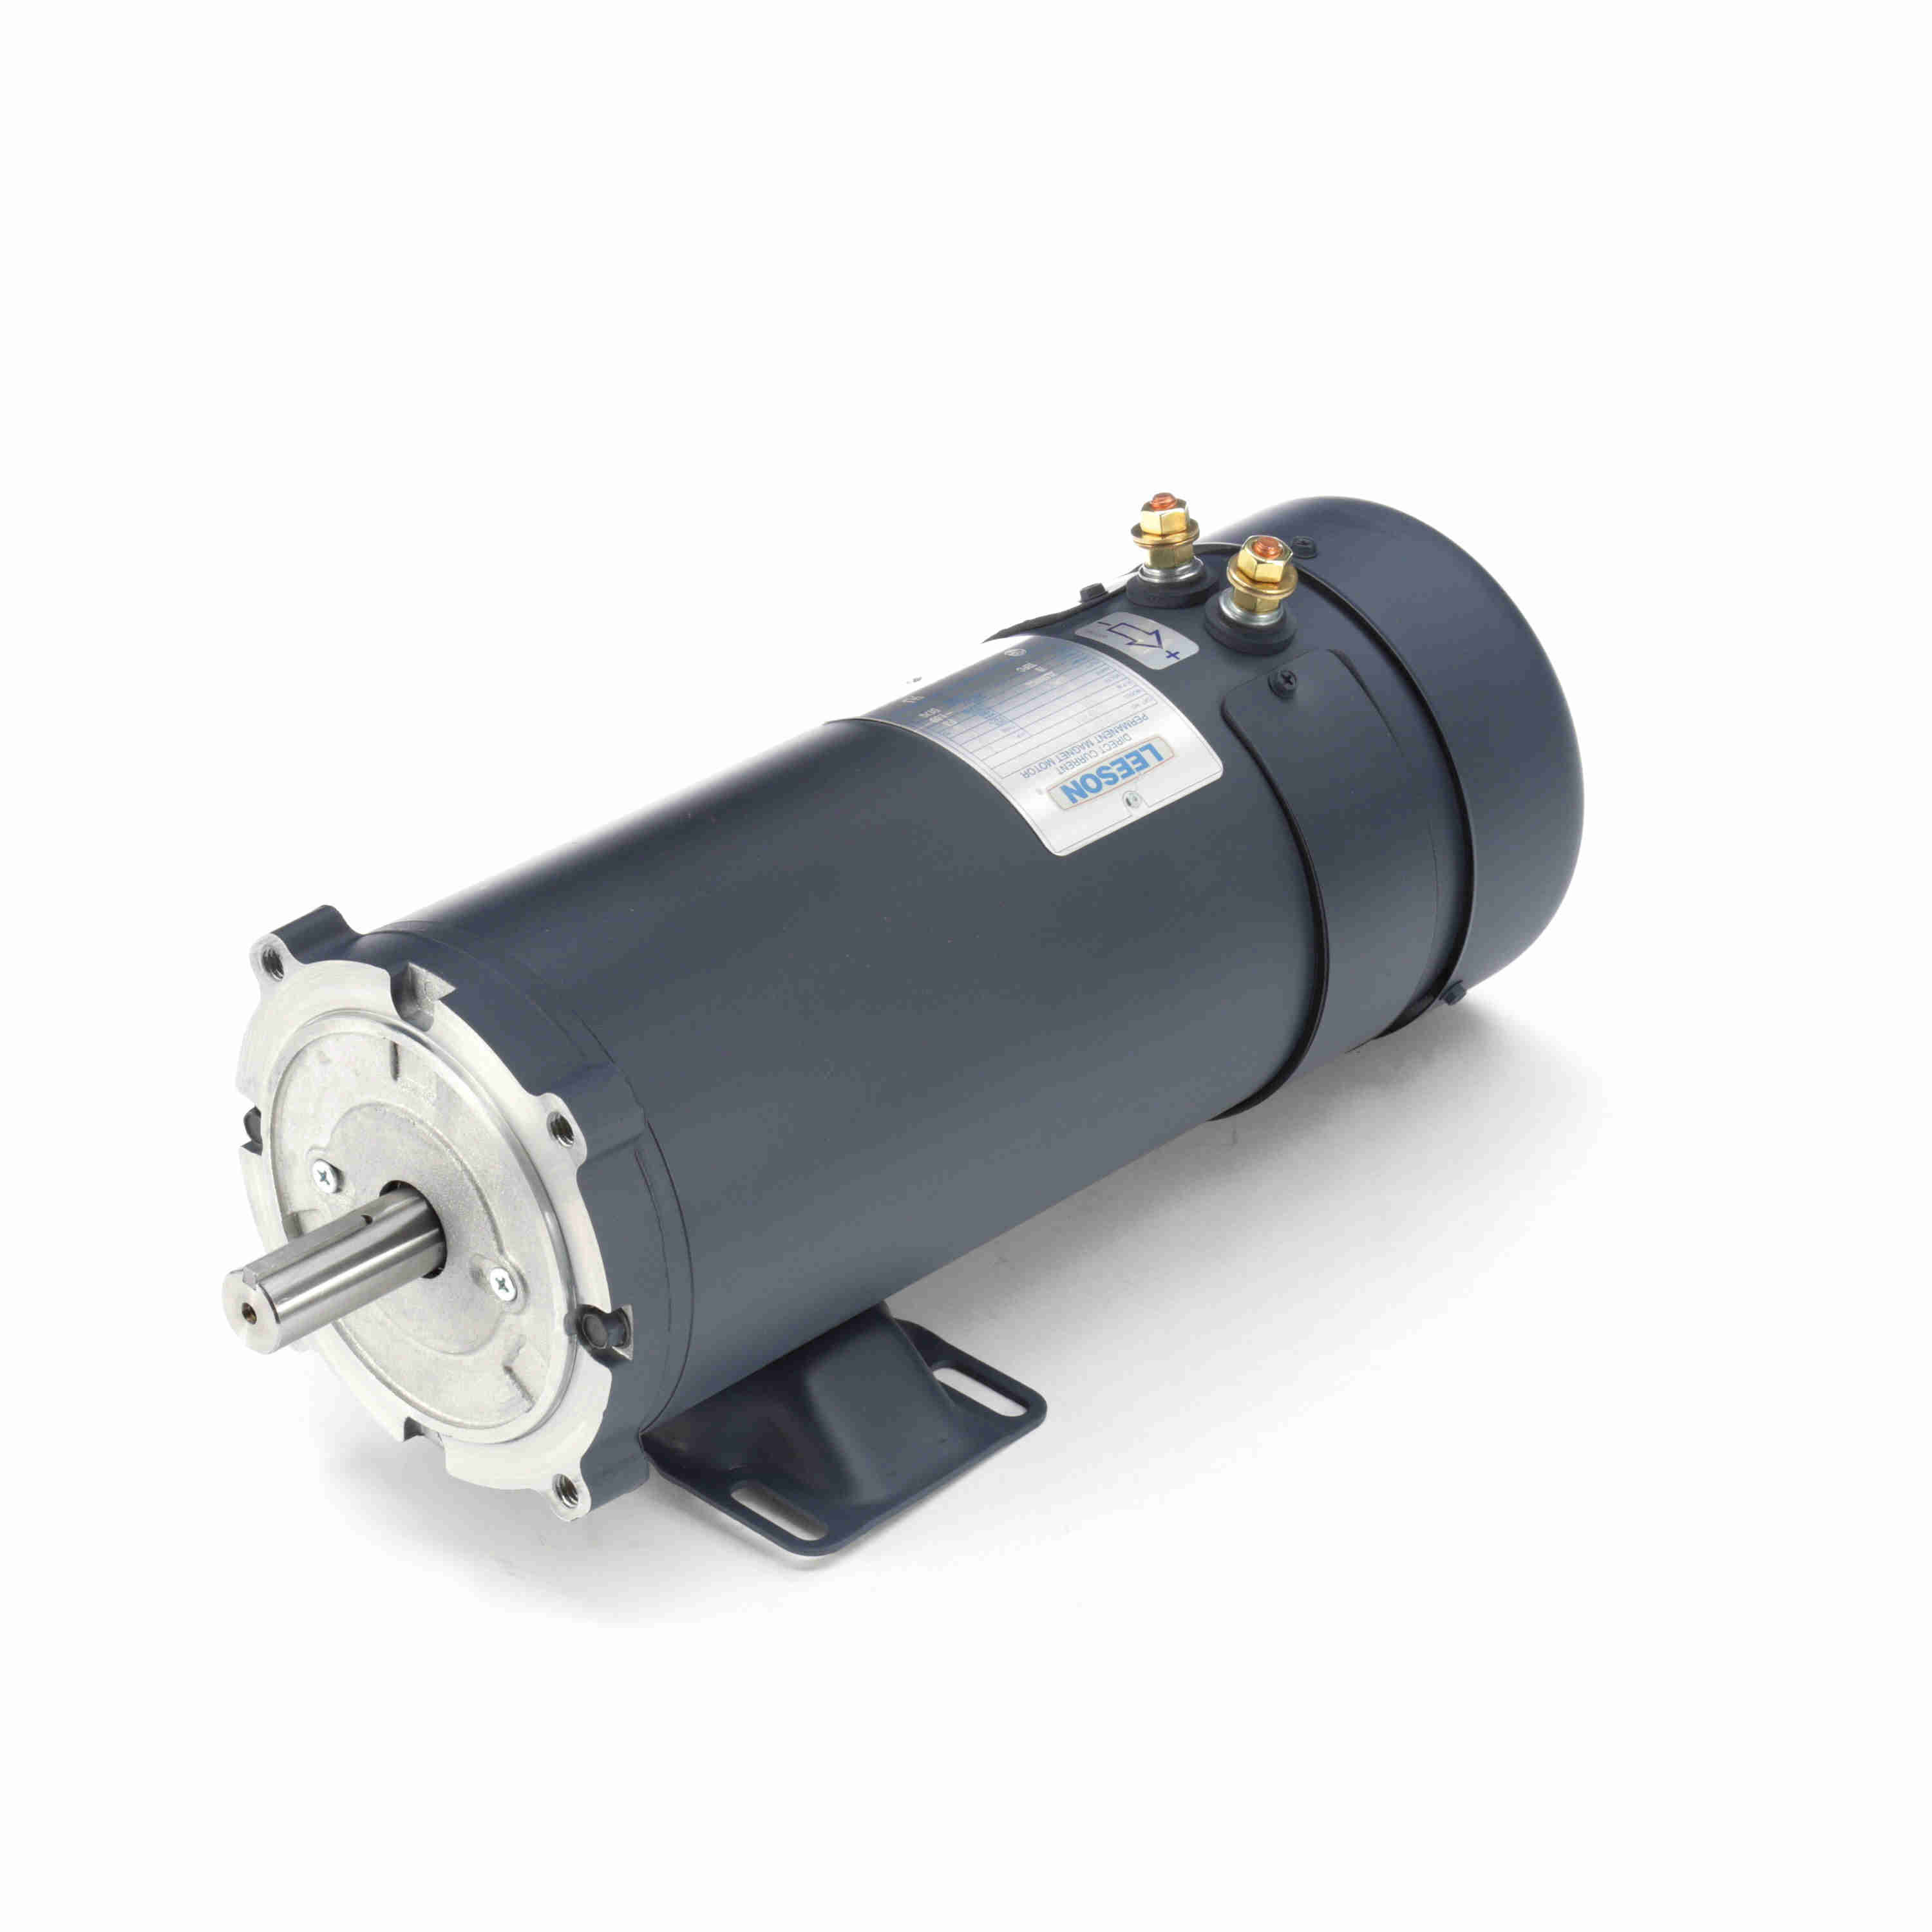 109106.00 Leeson 2HP Low Voltage DC Electric Motor, 1800RPM 2